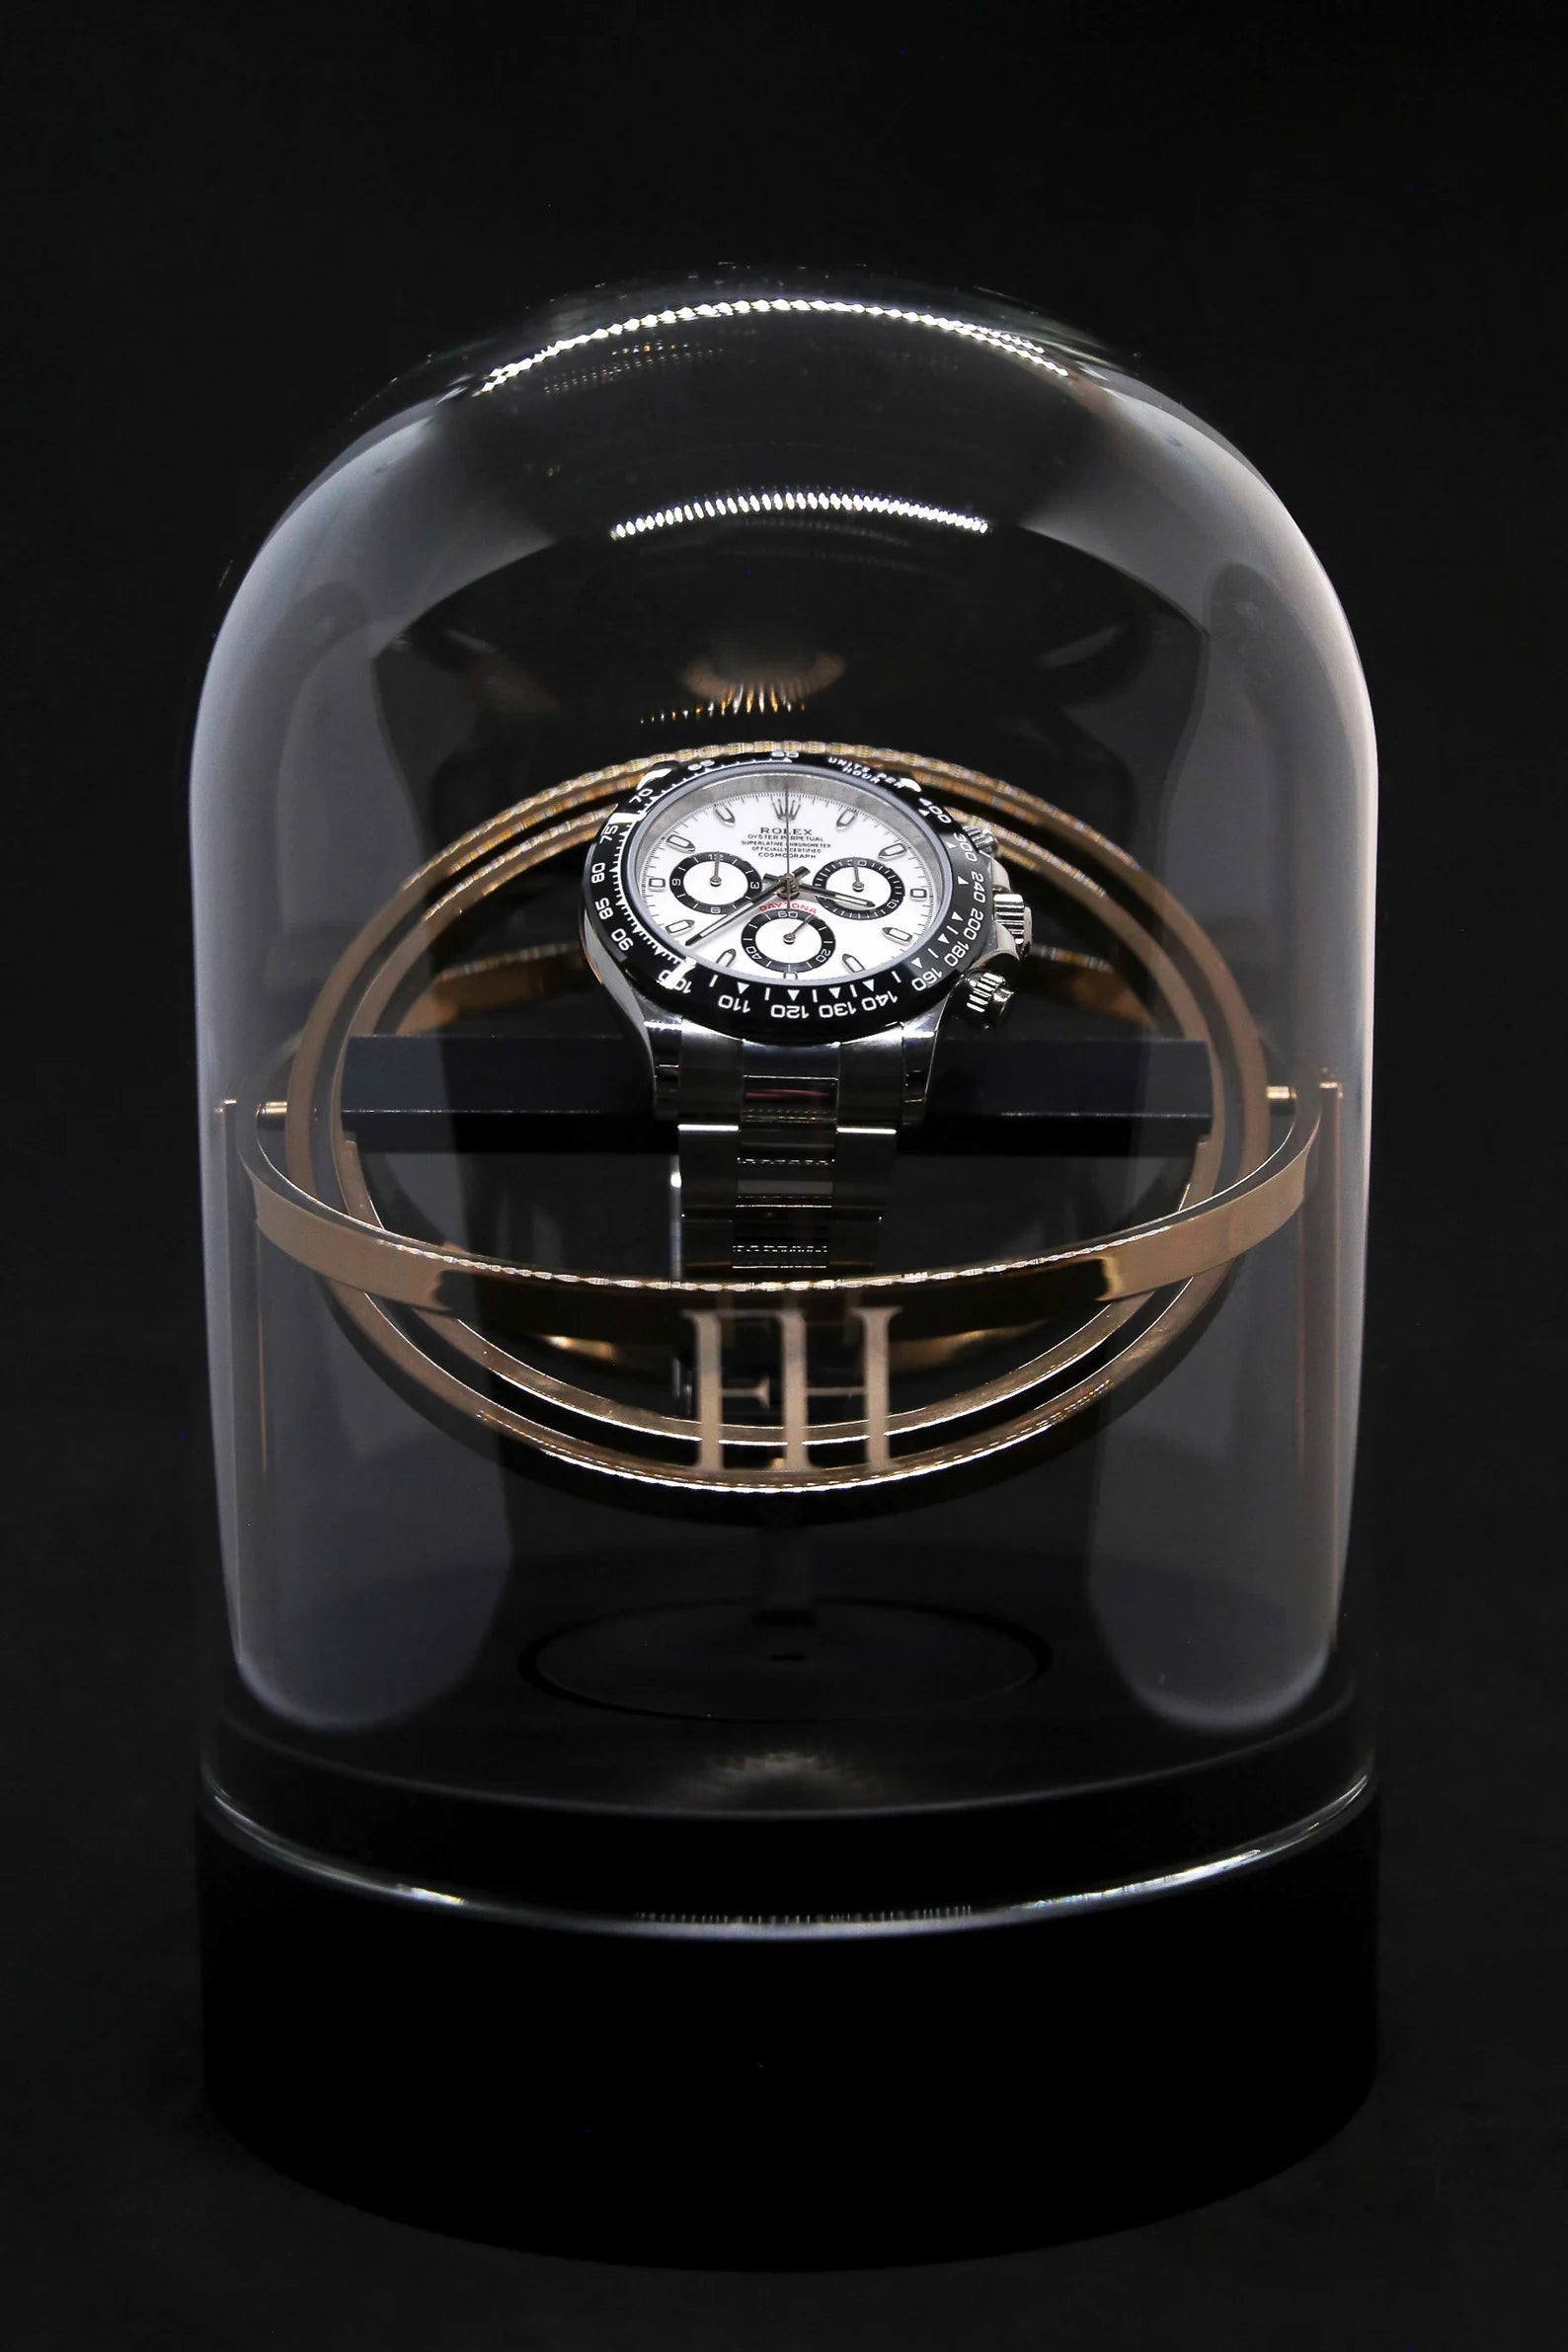 Watch Winder - Astronomia X1 Gold Edition - Gyro Automatic Watch Winder